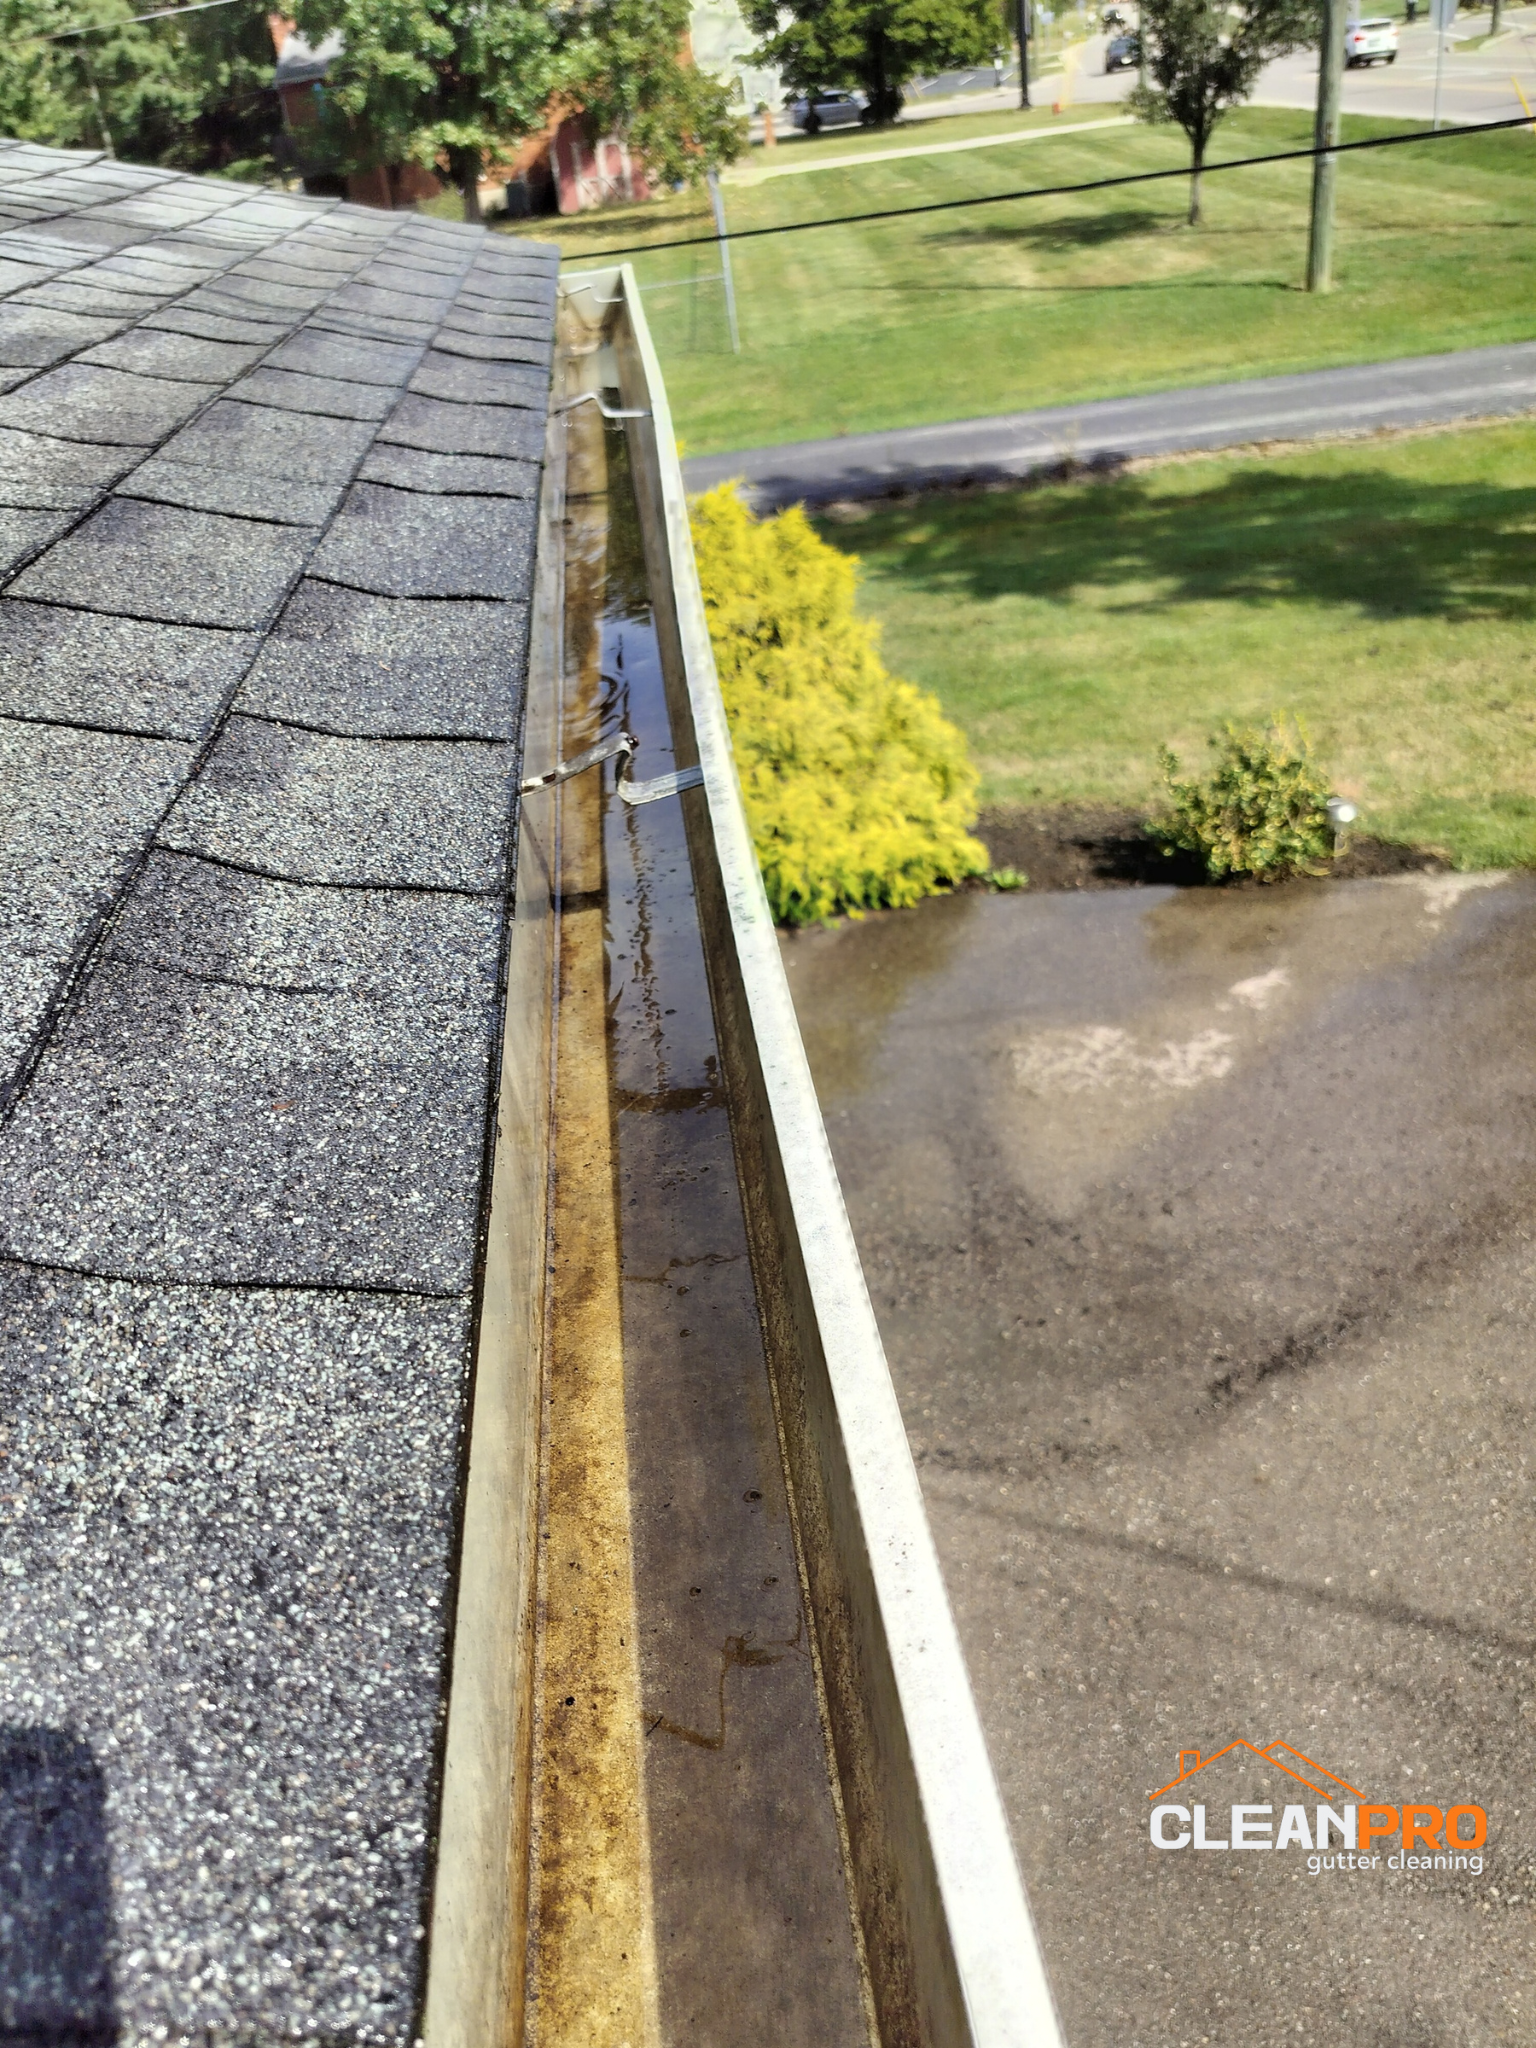 Residential Gutter Cleaning in Dayton OH